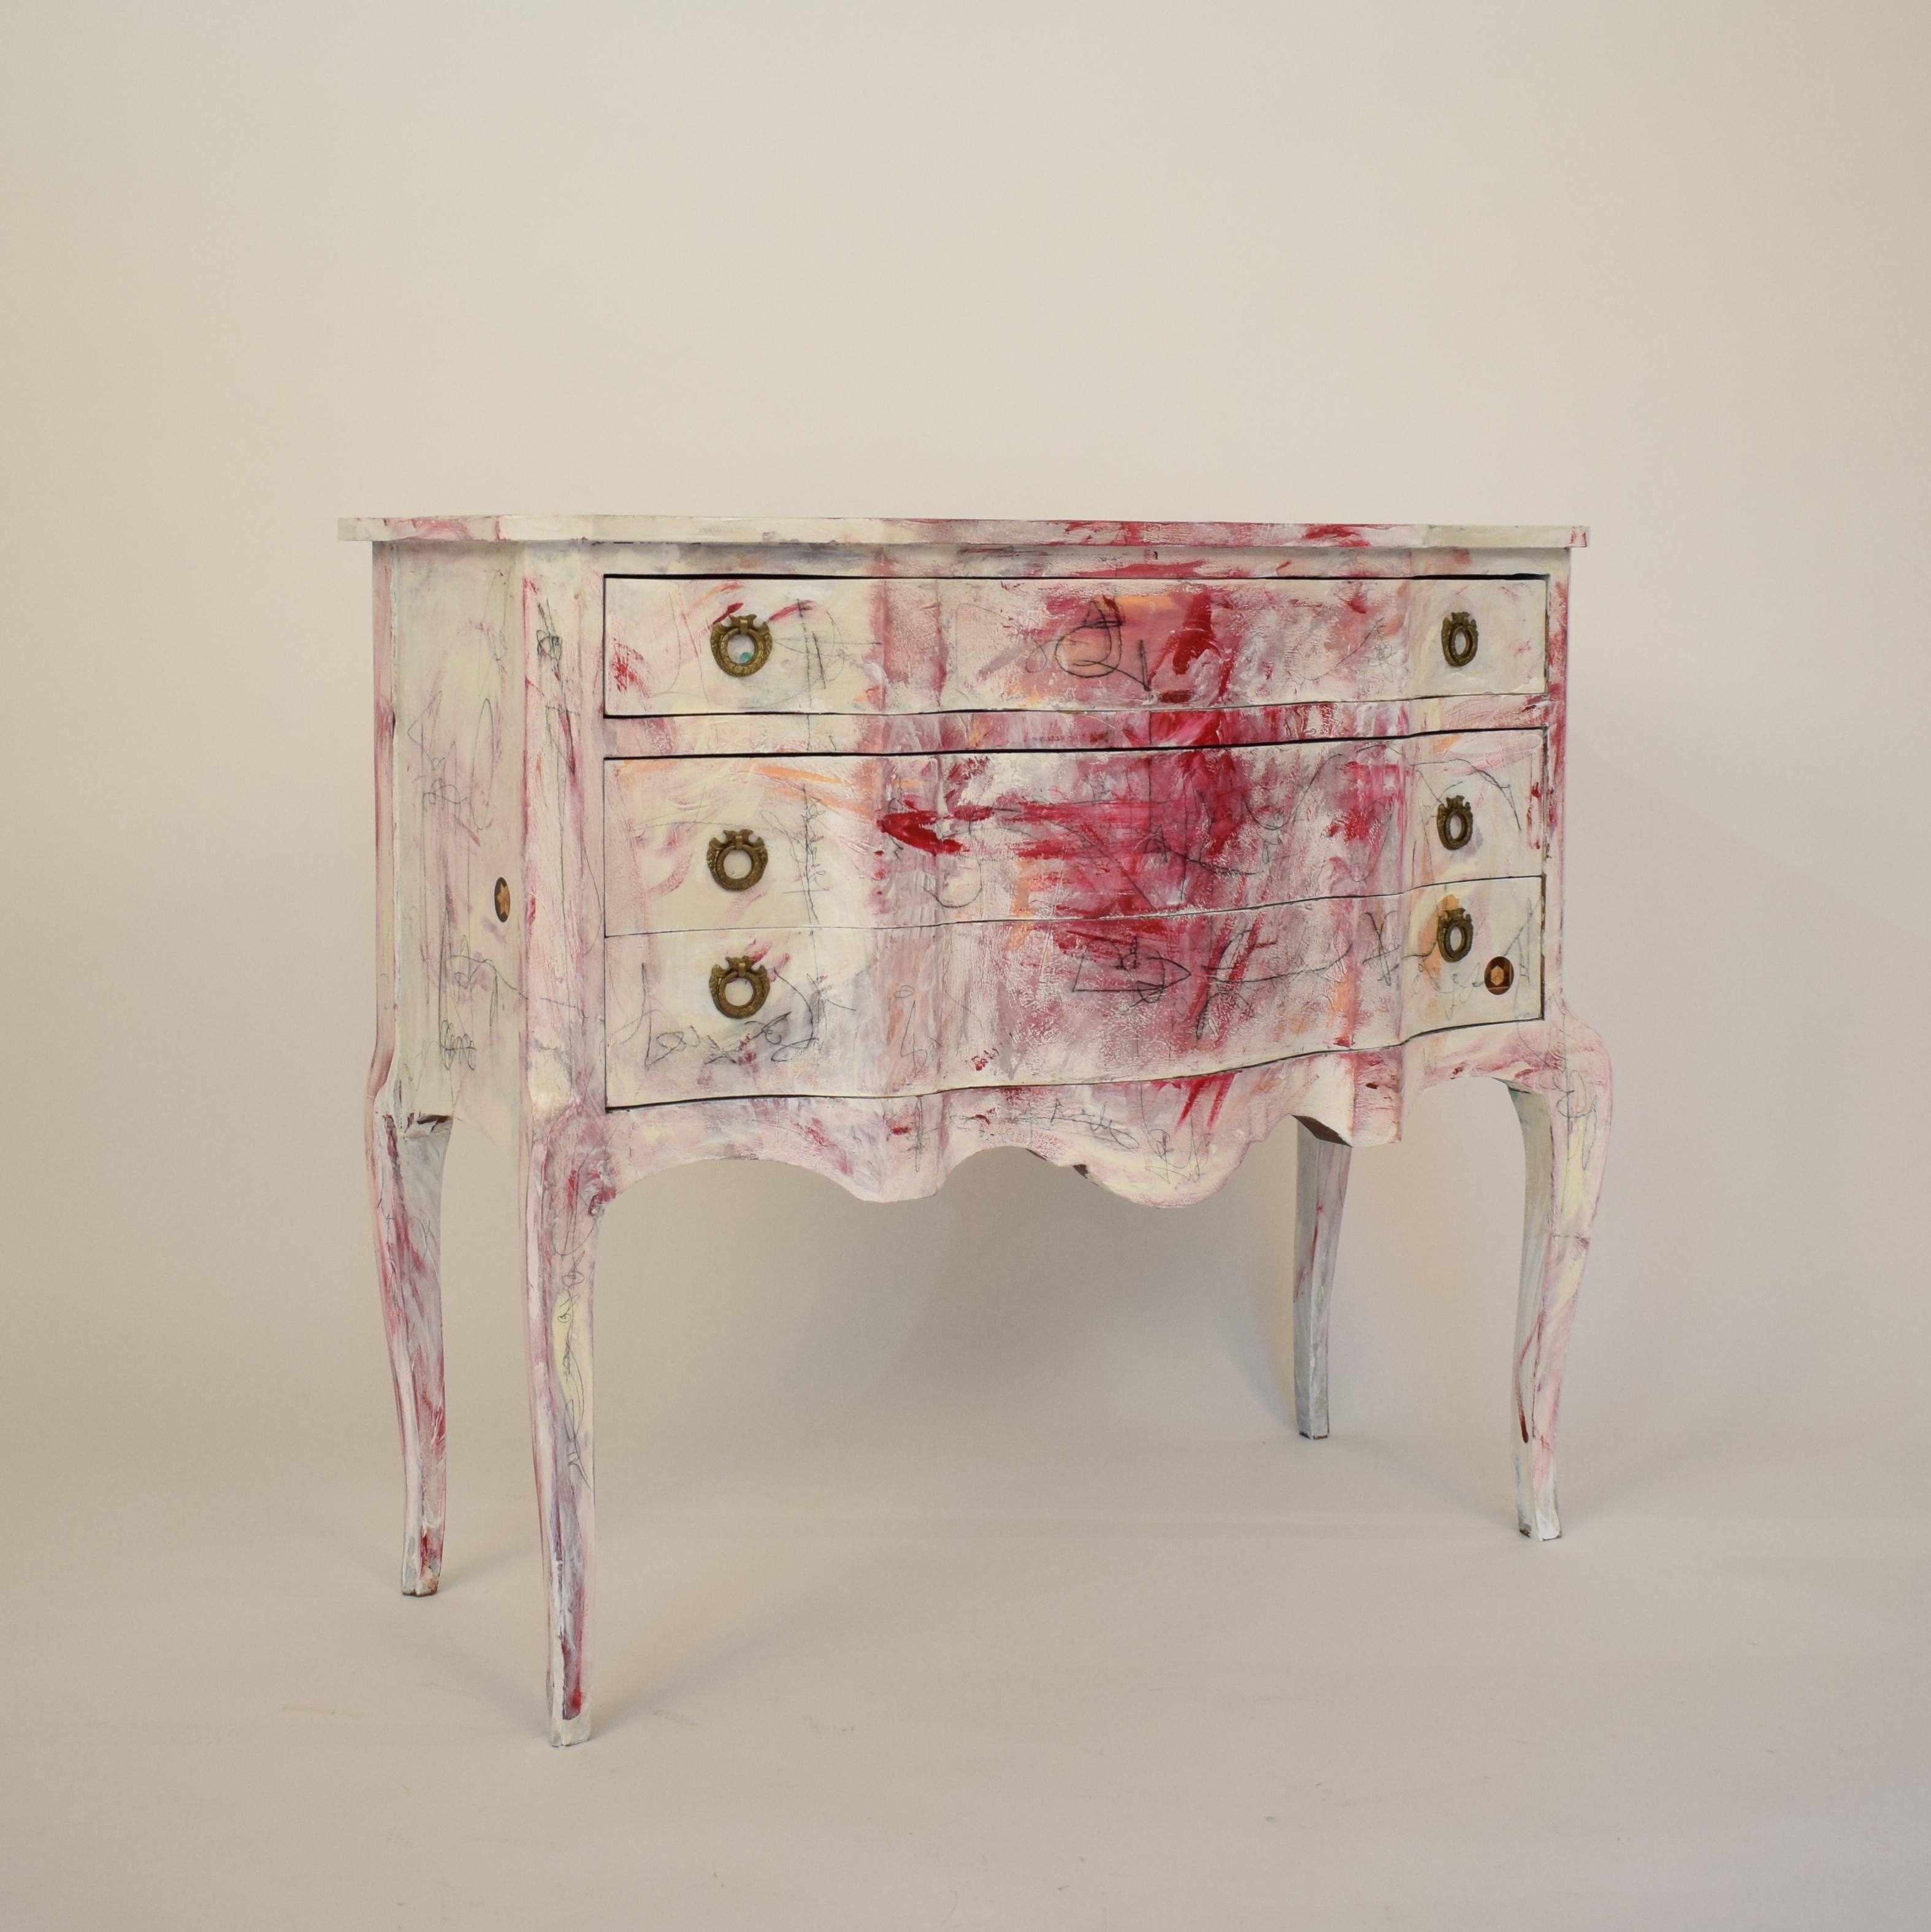 This beautiful hand painted contemporary chest of drawers was made by the Berlin based Artist Felix Bachmann.
The substrate of the commode is pine and hardwood. The surface coat is hand painted with acrylic, chalk and pencil.
There is a final coat